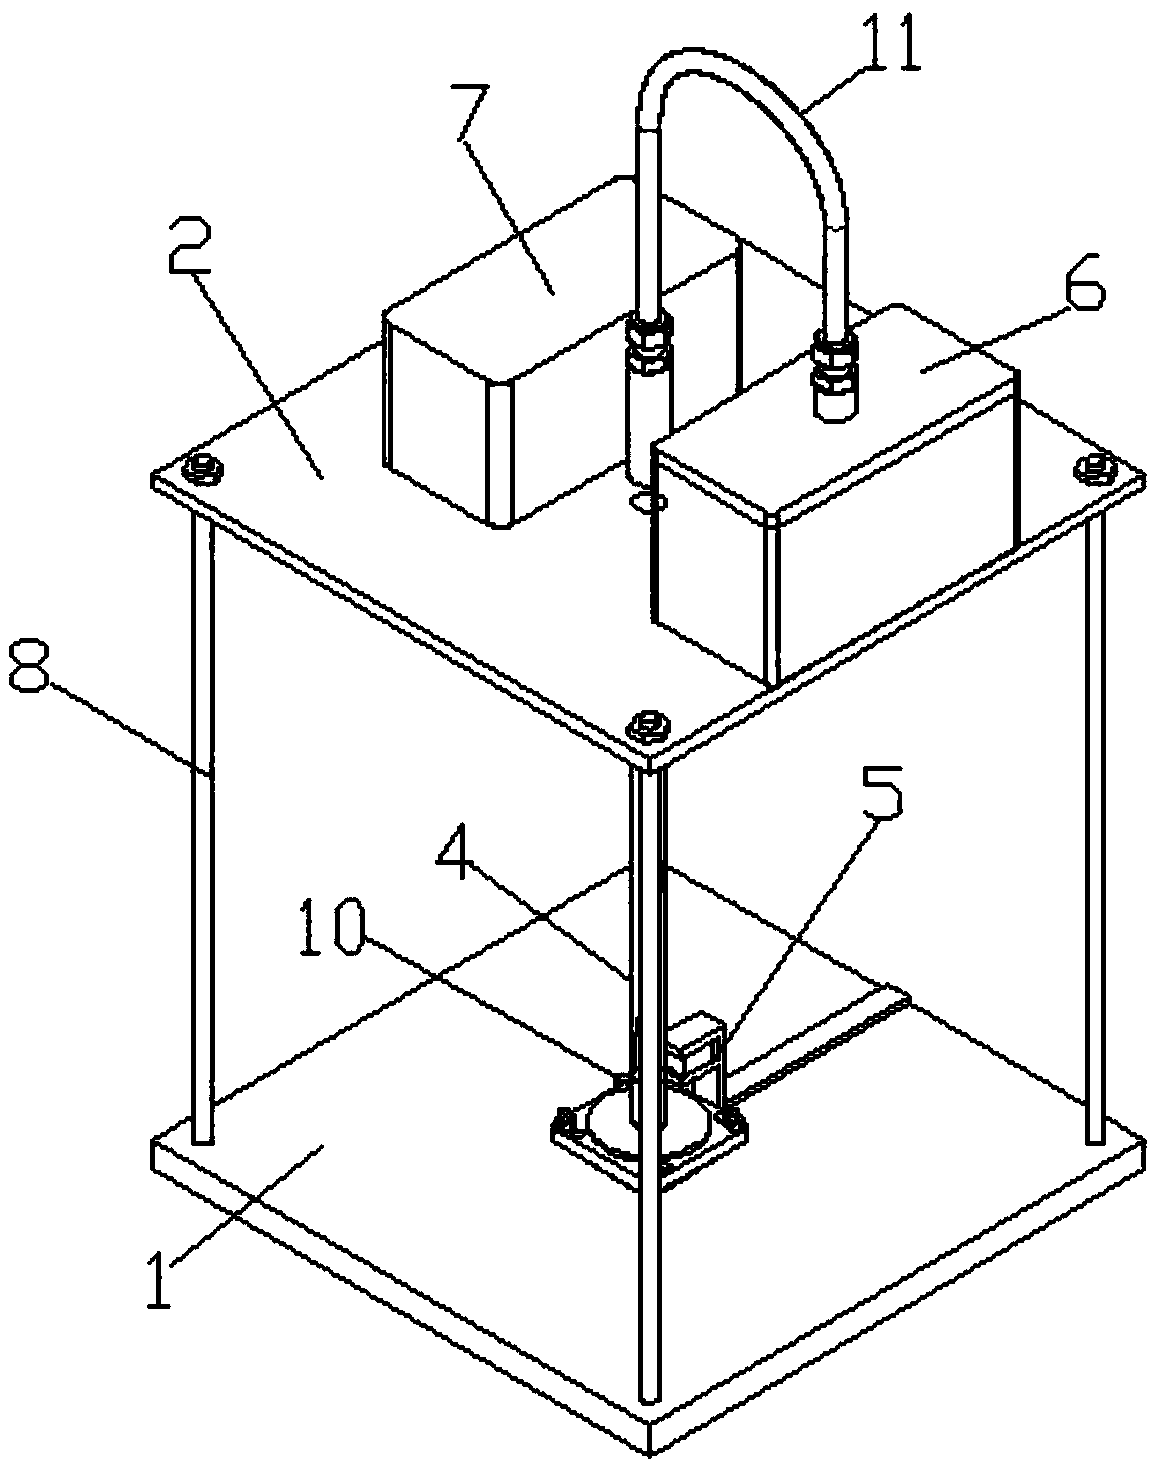 Touchable spatial holographic projection device and application thereof